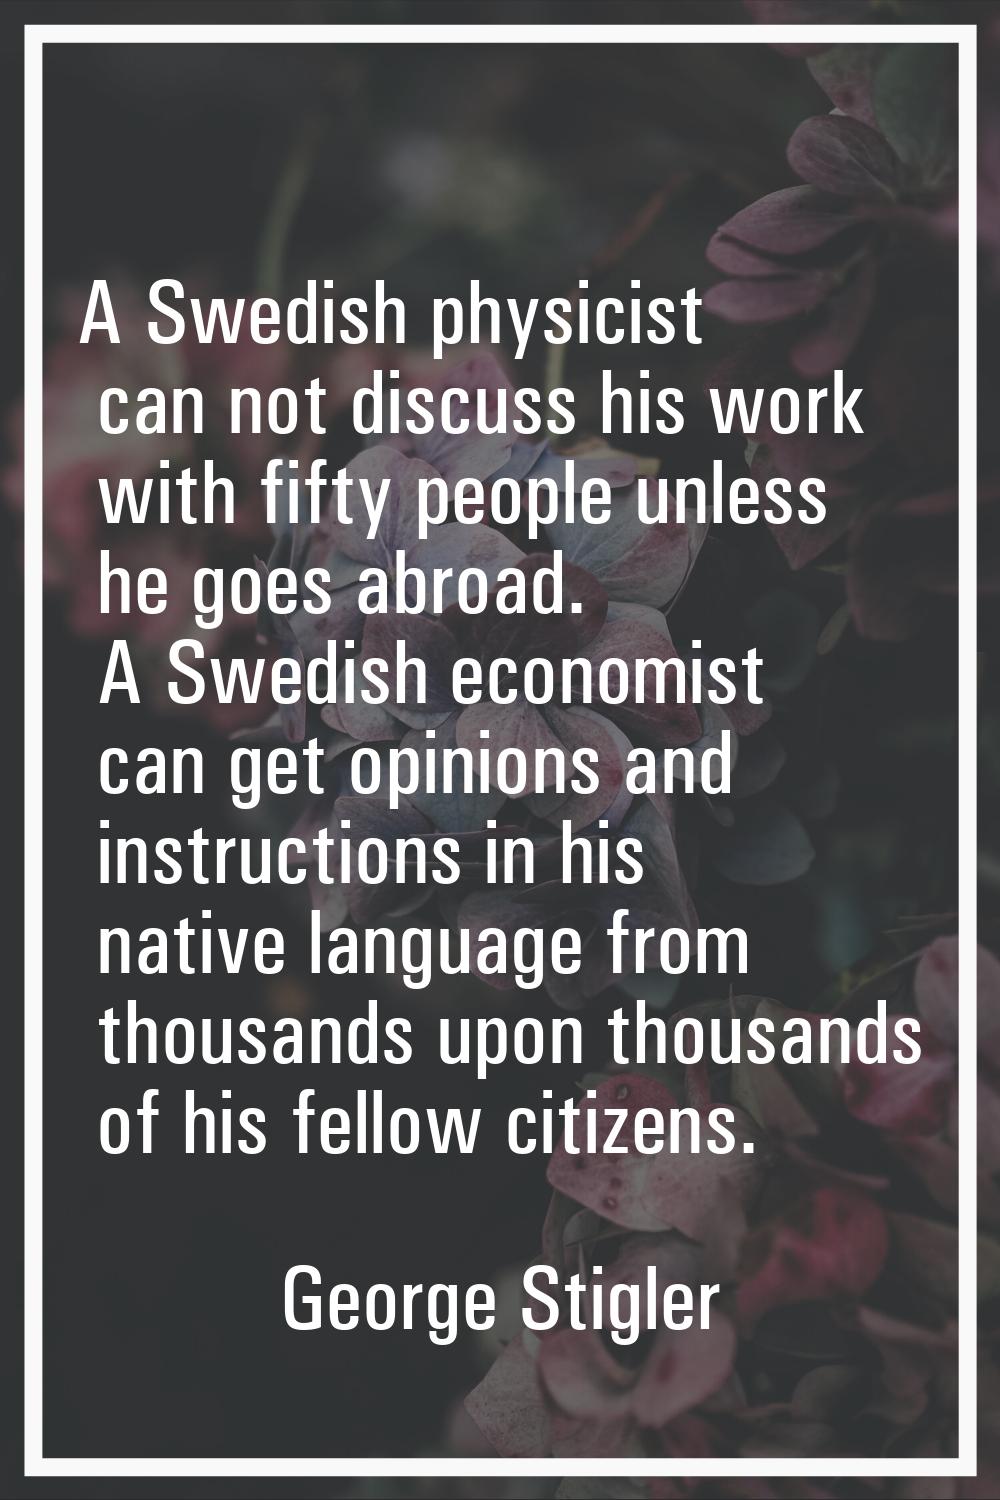 A Swedish physicist can not discuss his work with fifty people unless he goes abroad. A Swedish eco